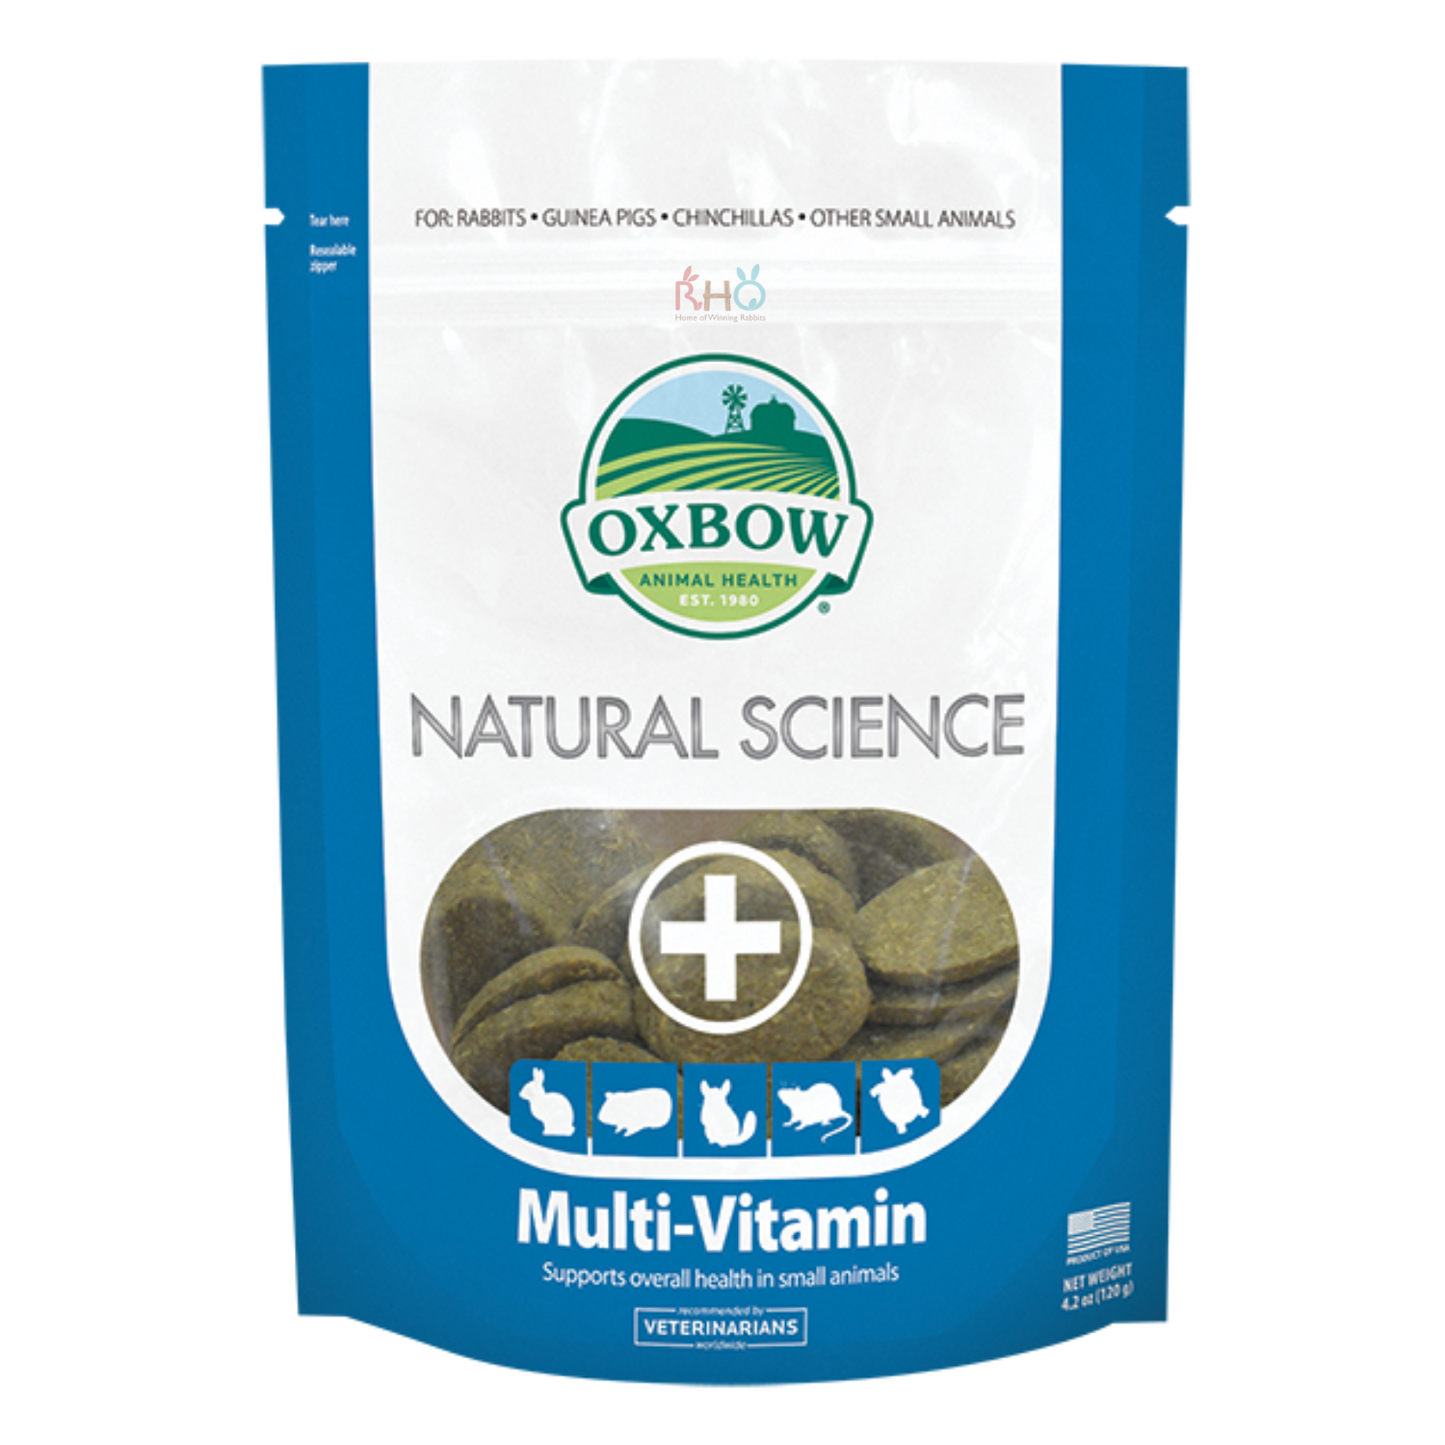 Oxbow Natural Science Multi-Vitamin 60 Tablets